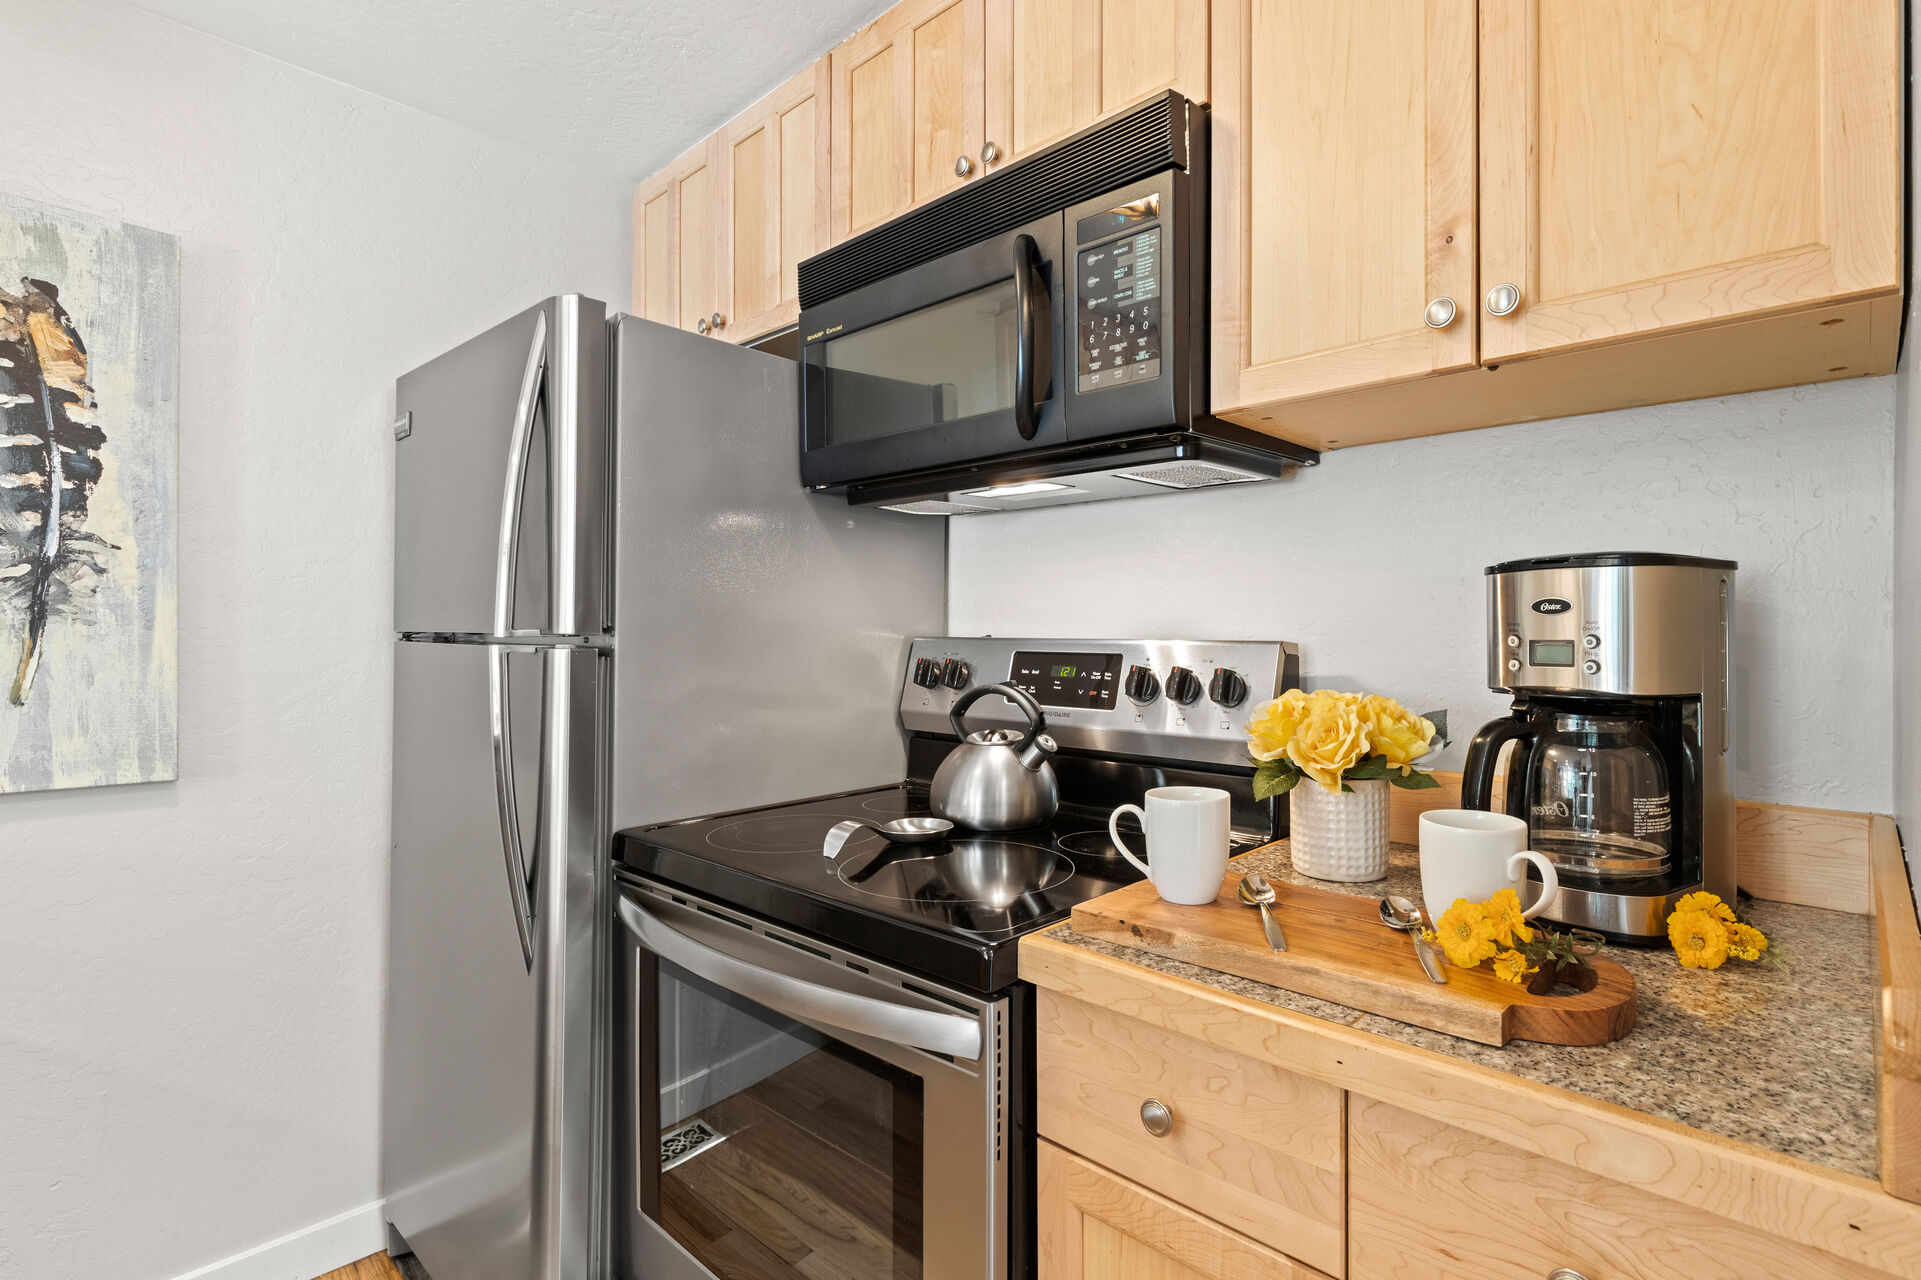 Fully Equipped Kitchen with stainless steel appliances and ample counter space